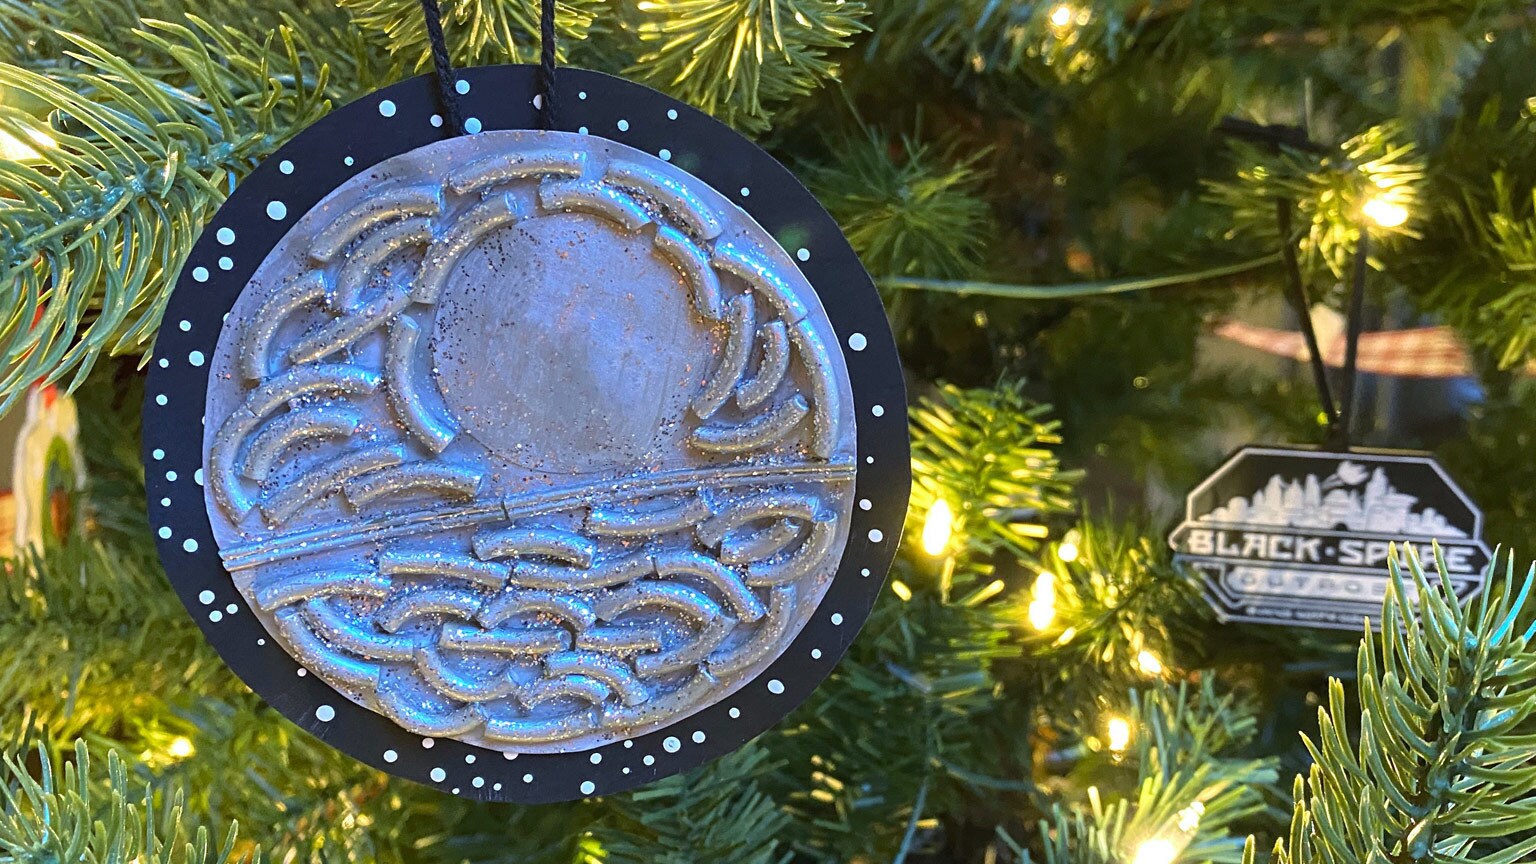 This Death Star Ornament Is the Ultimate Family Craft in the Universe